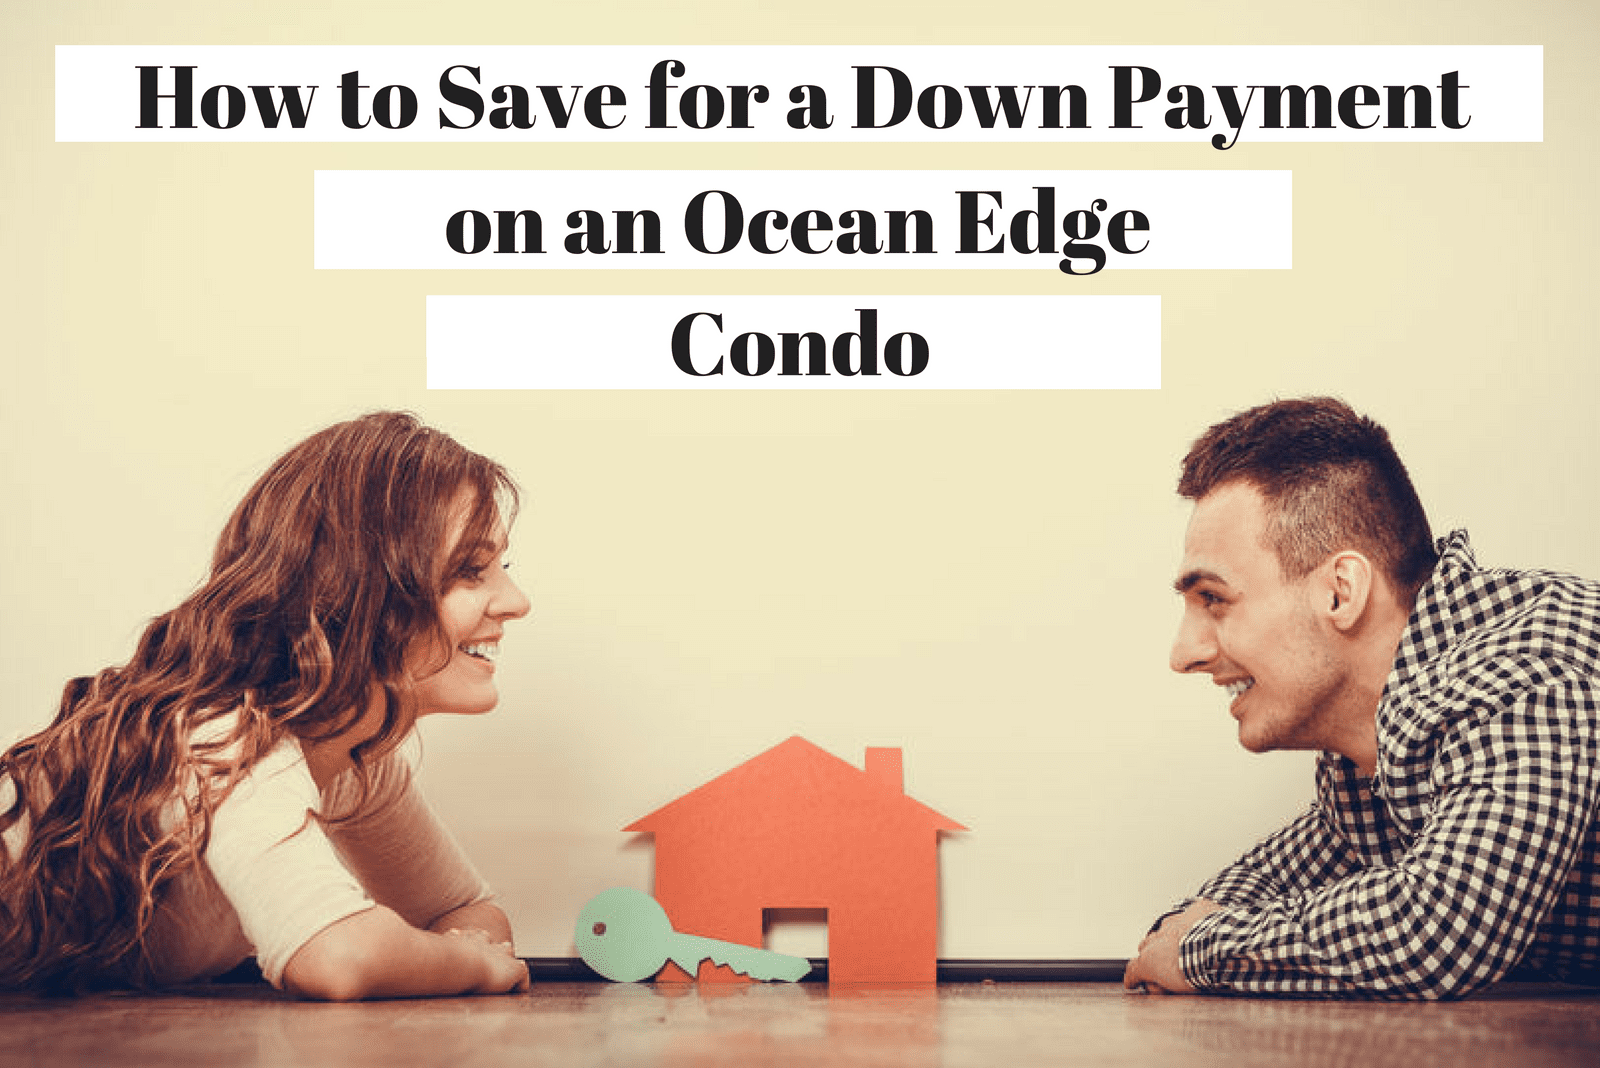 How to Save for a Down Payment on an Ocean Edge Condo